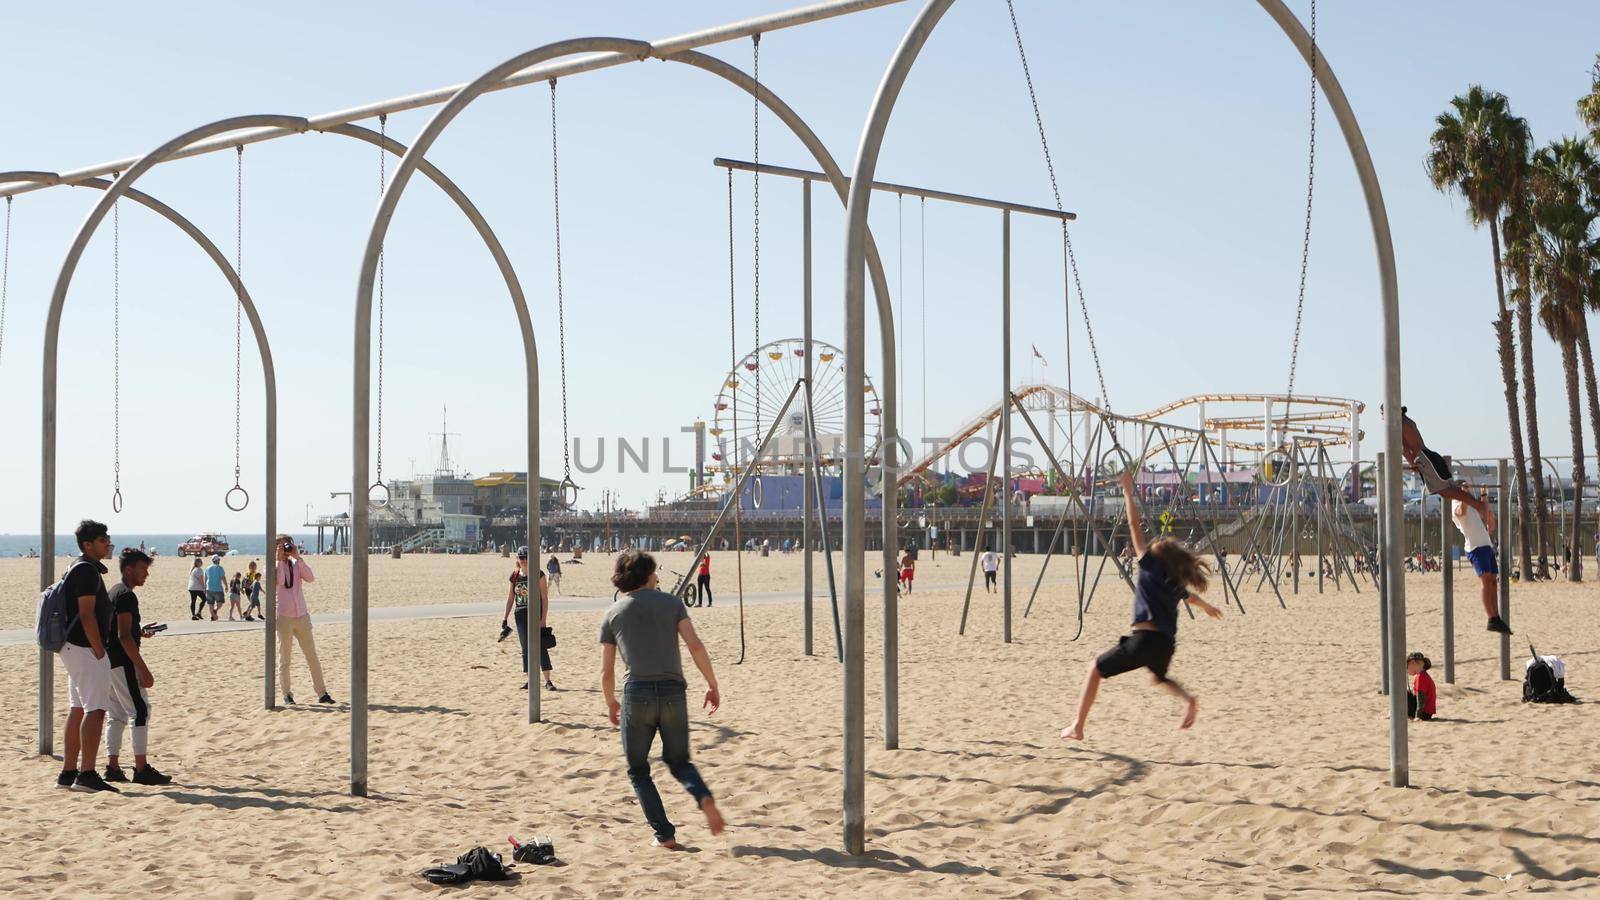 SANTA MONICA, LOS ANGELES CA USA - 28 OCT 2019: California summertime pacific ocean beach aesthetic, young people training and having fun on sports ground. Muscle beach and amusement park on pier by DogoraSun